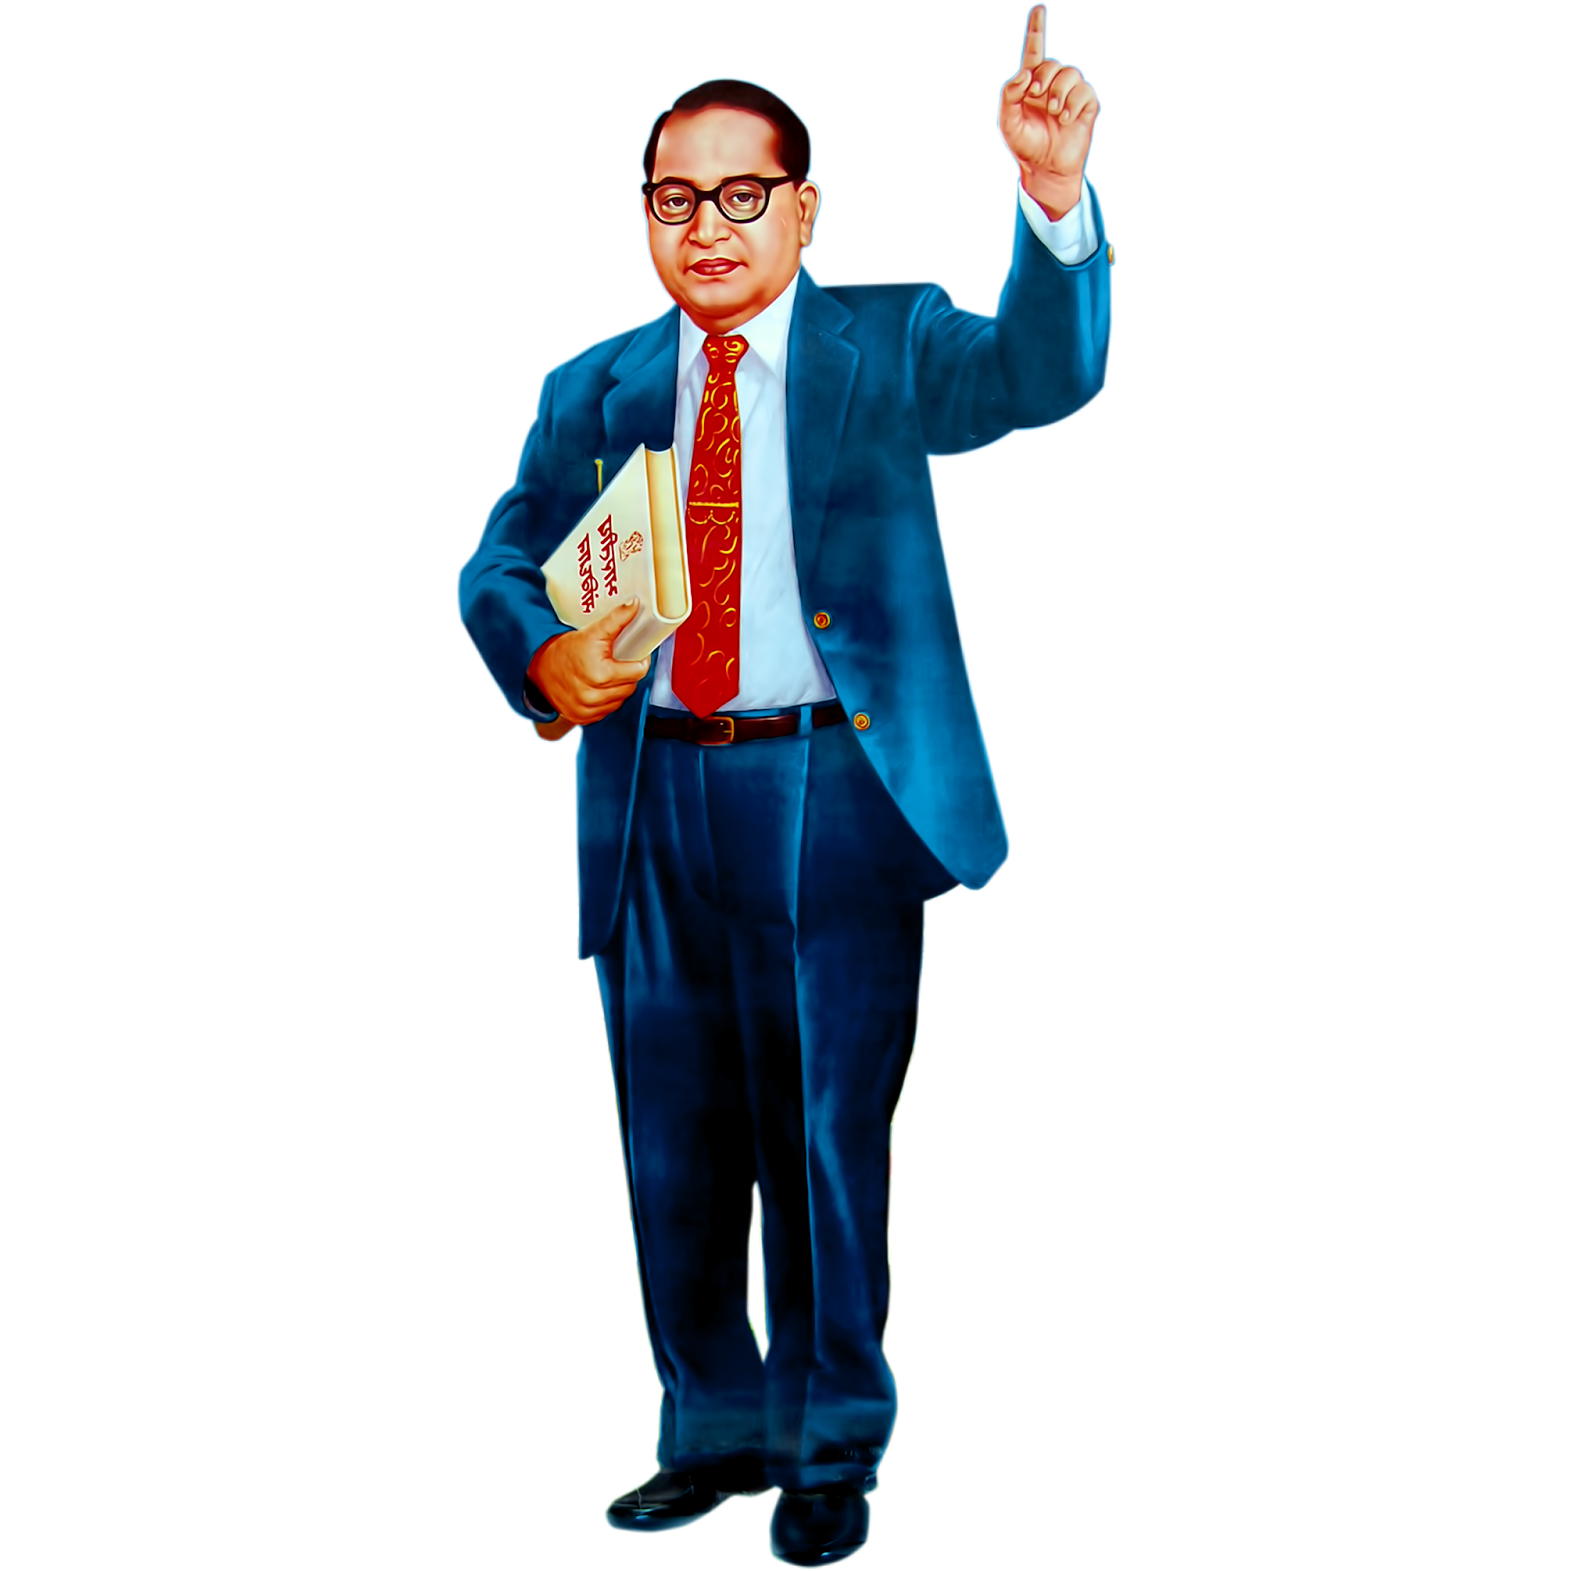 Download Top 999+ Images of Ambedkar – Incredible Collection of Ambedkar  Images in Full 4K Resolution